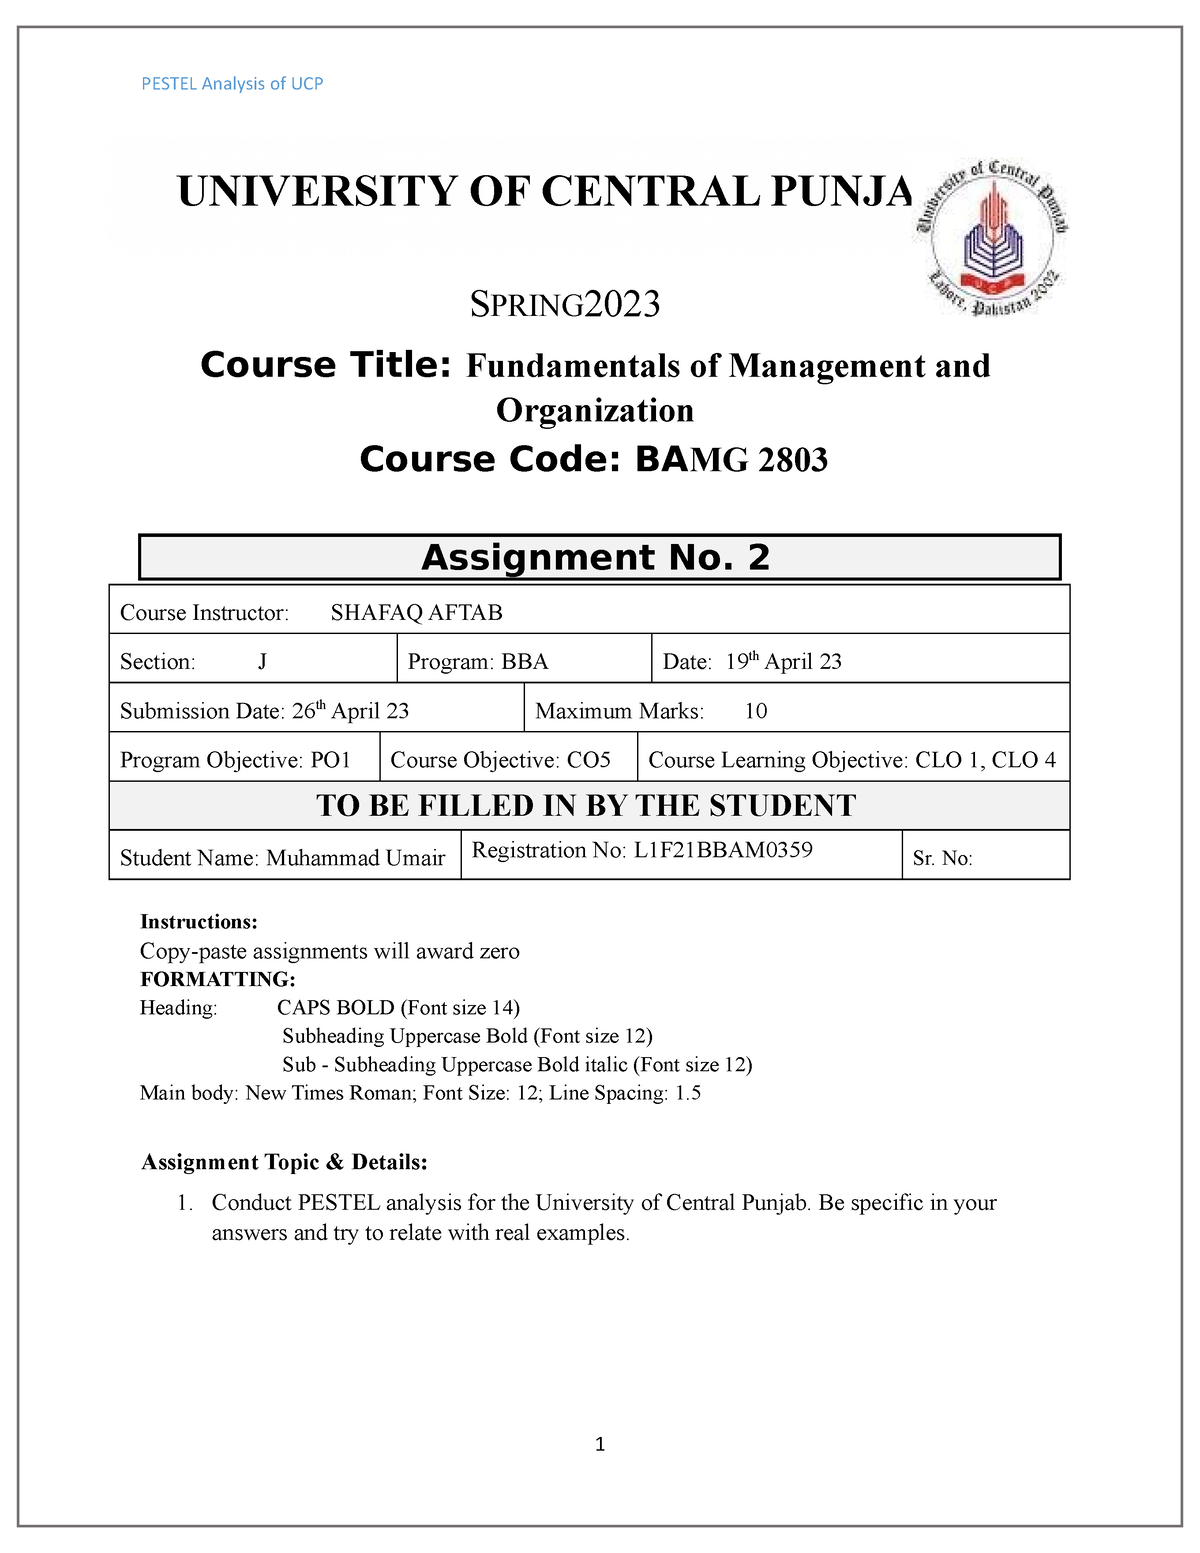 ucp assignment front page pdf